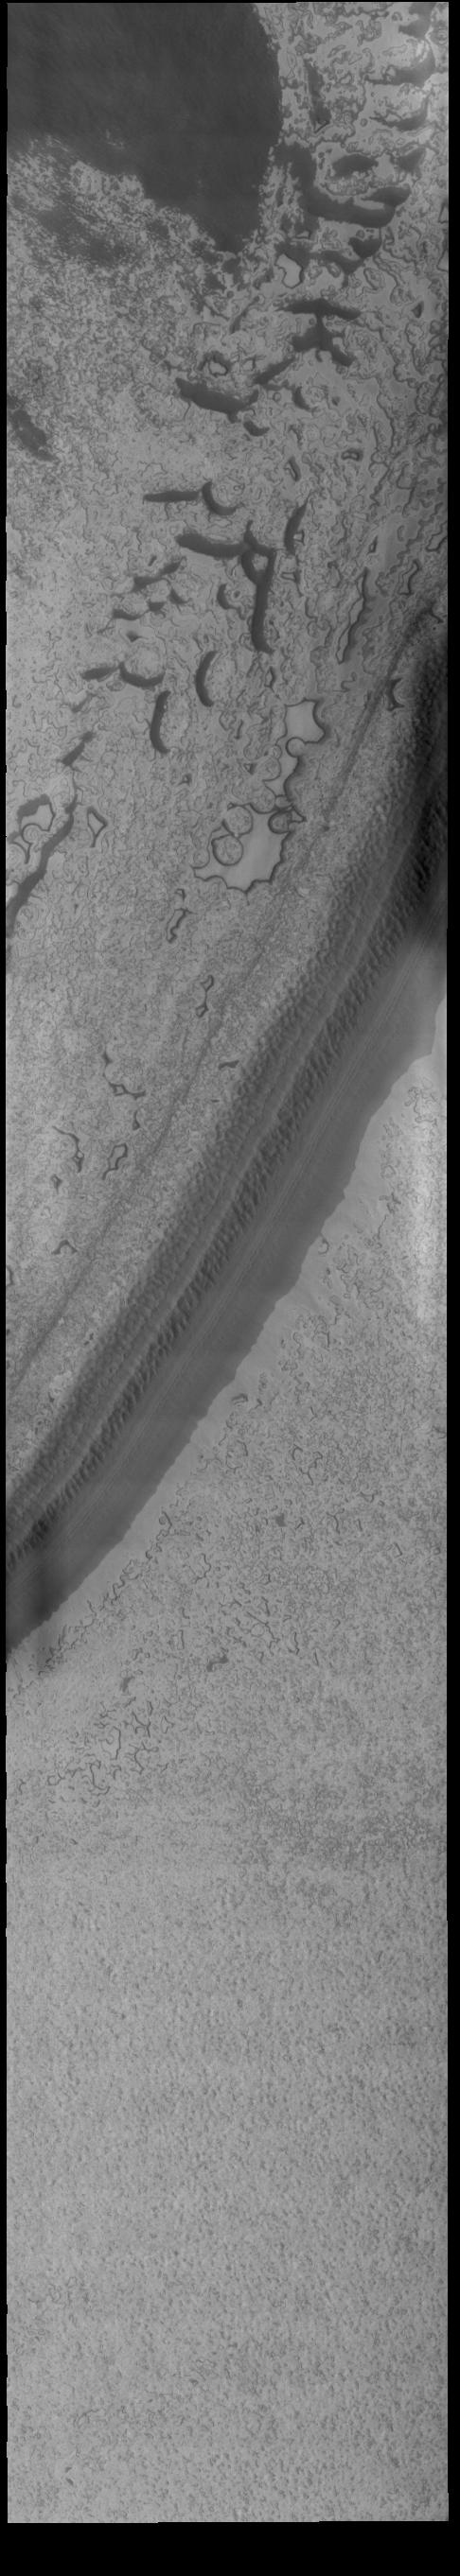 This image from NASAs Mars Odyssey shows part of the south polar cap. This image was taken at the end of southern summer.